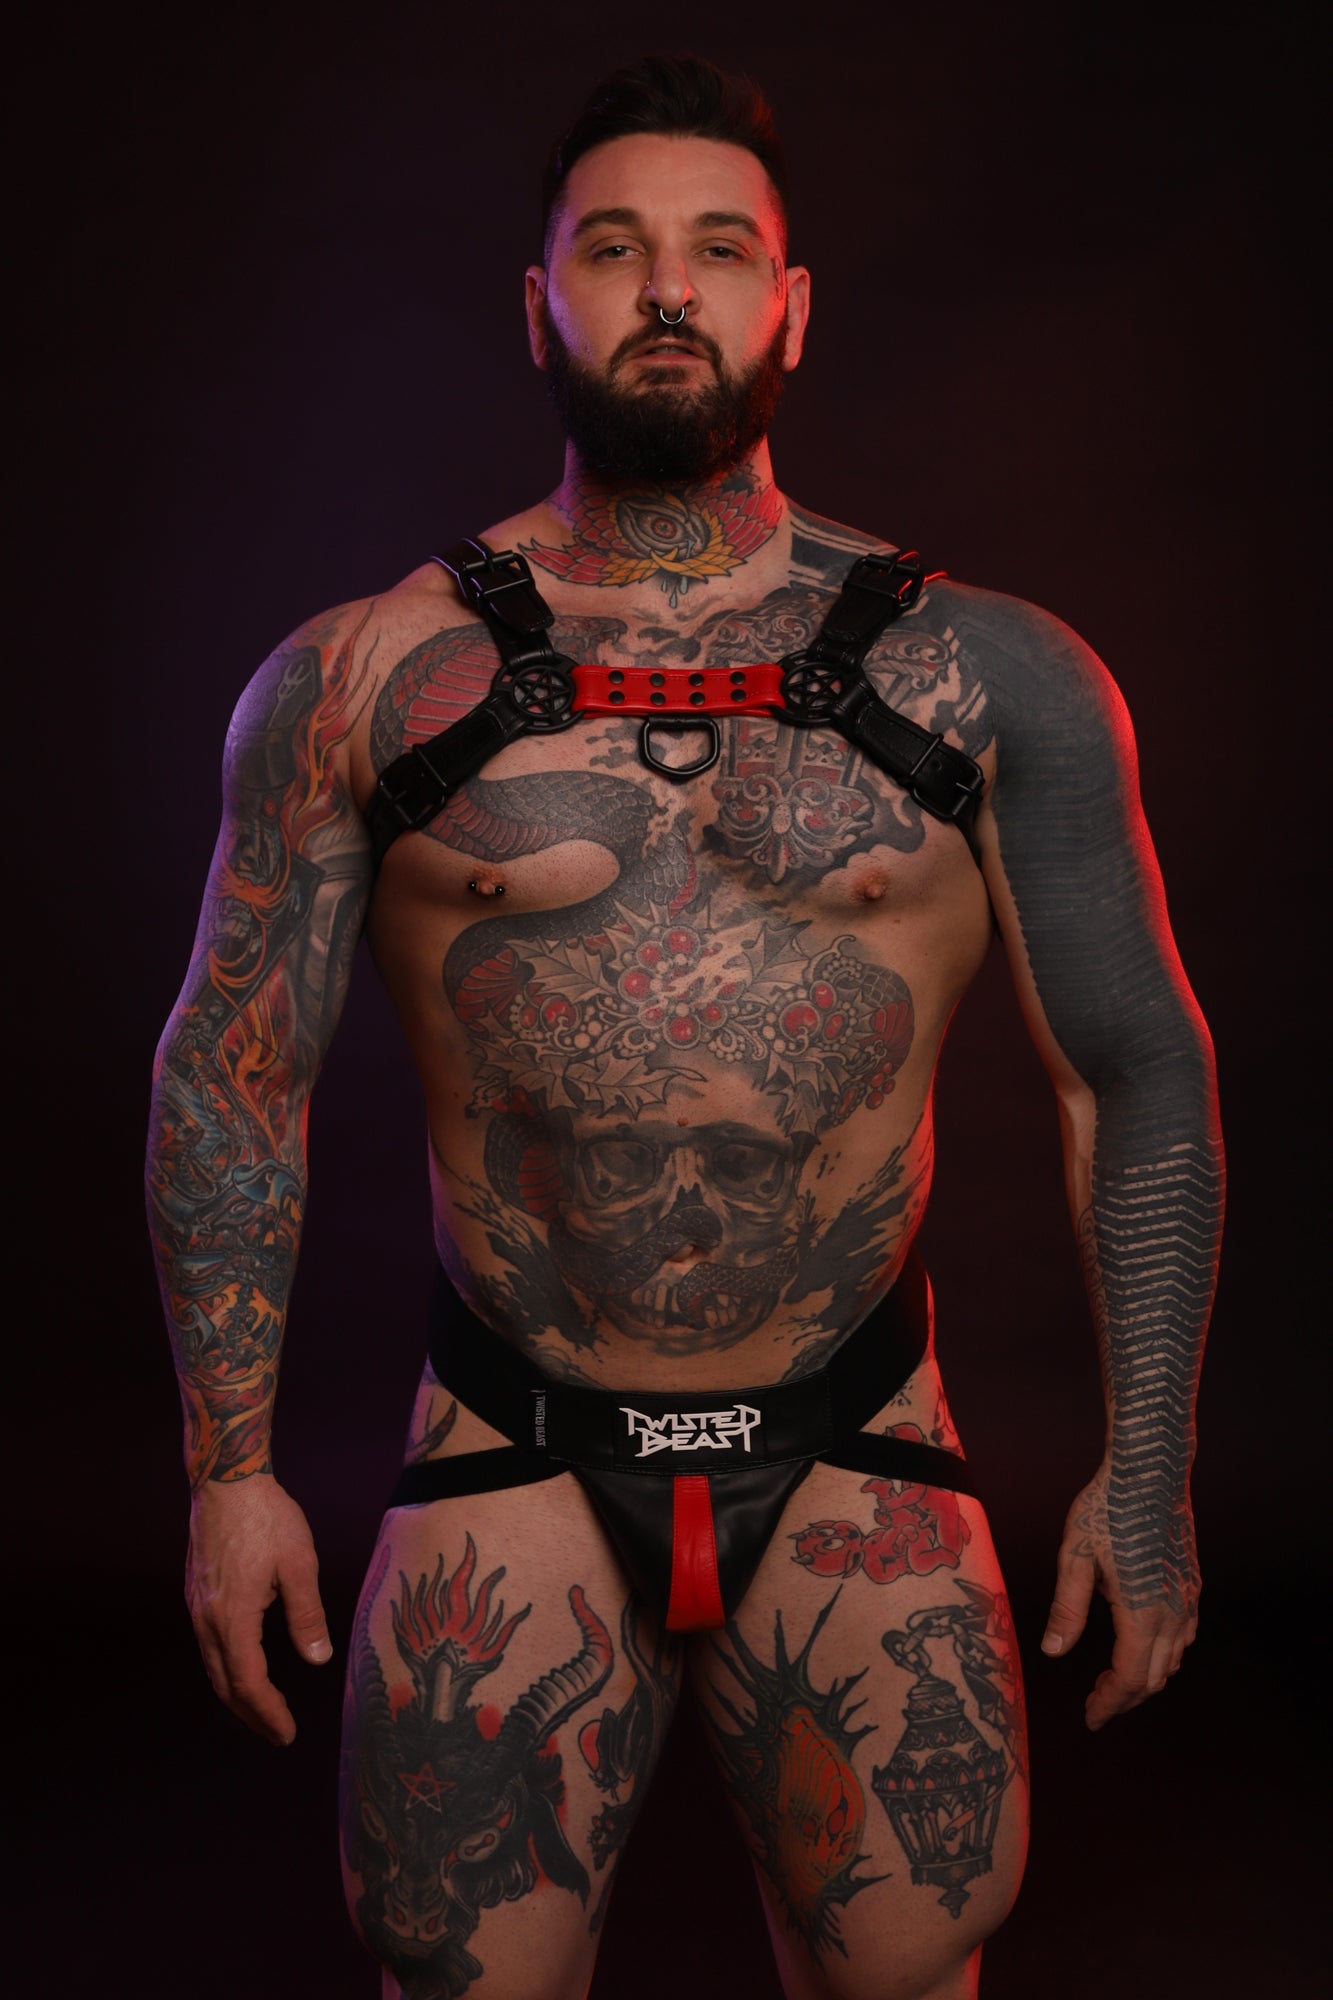 A fully front product photo of a red Beast Harness by Twisted Beast.